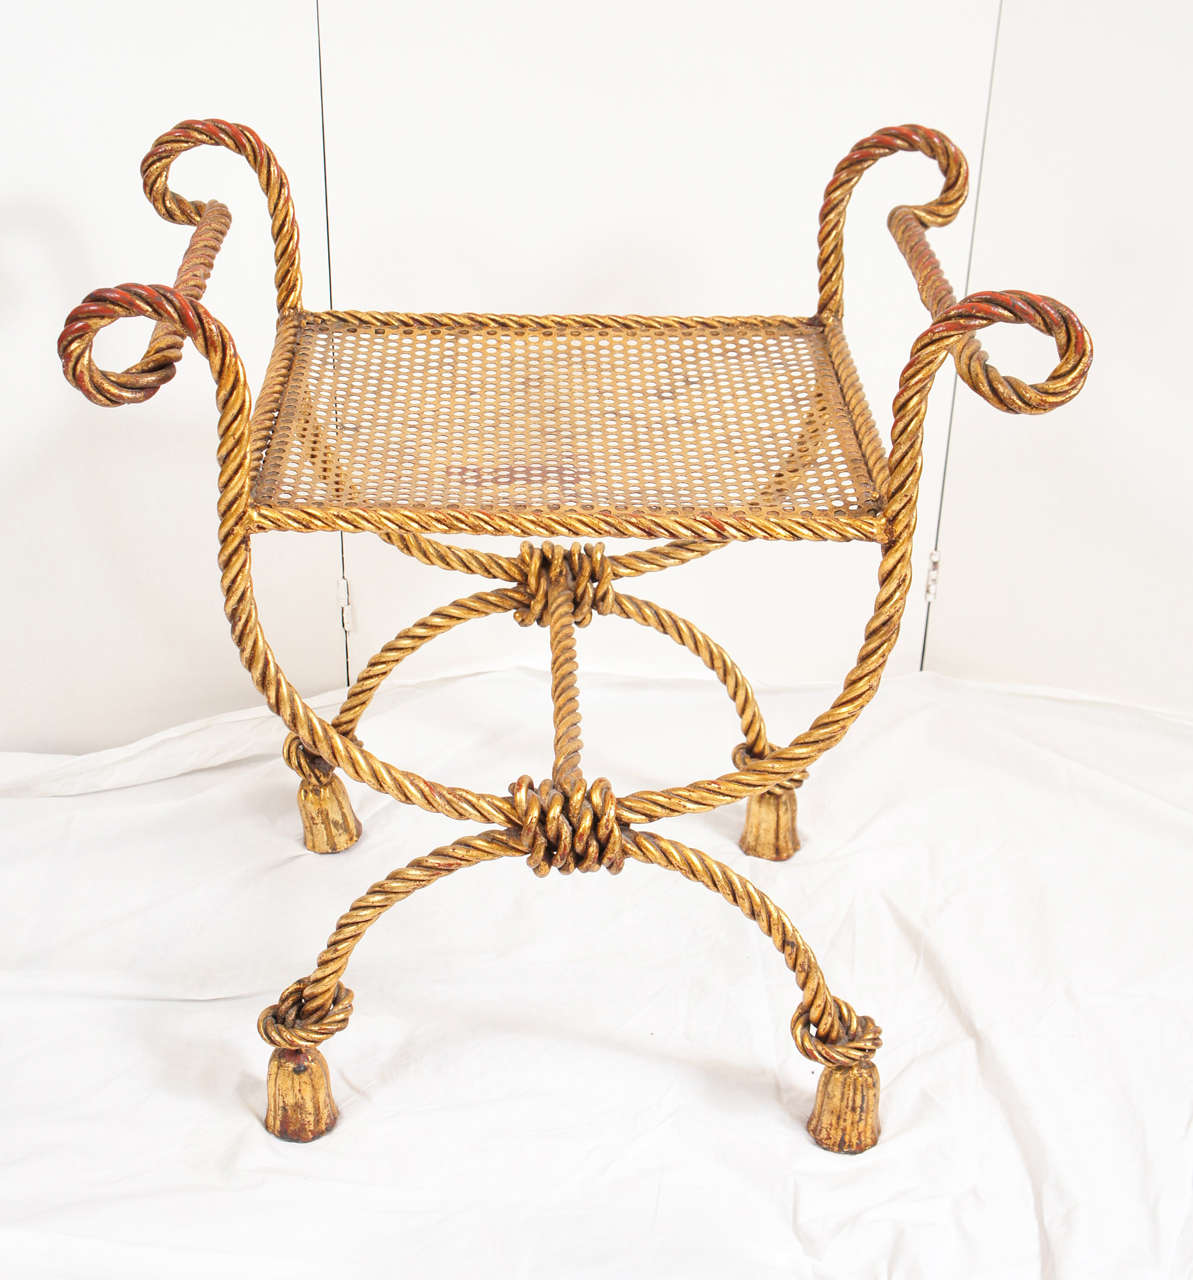 Gilded metal, rope patterned bench with tassel feet. Probably French or Italian, circa 1950